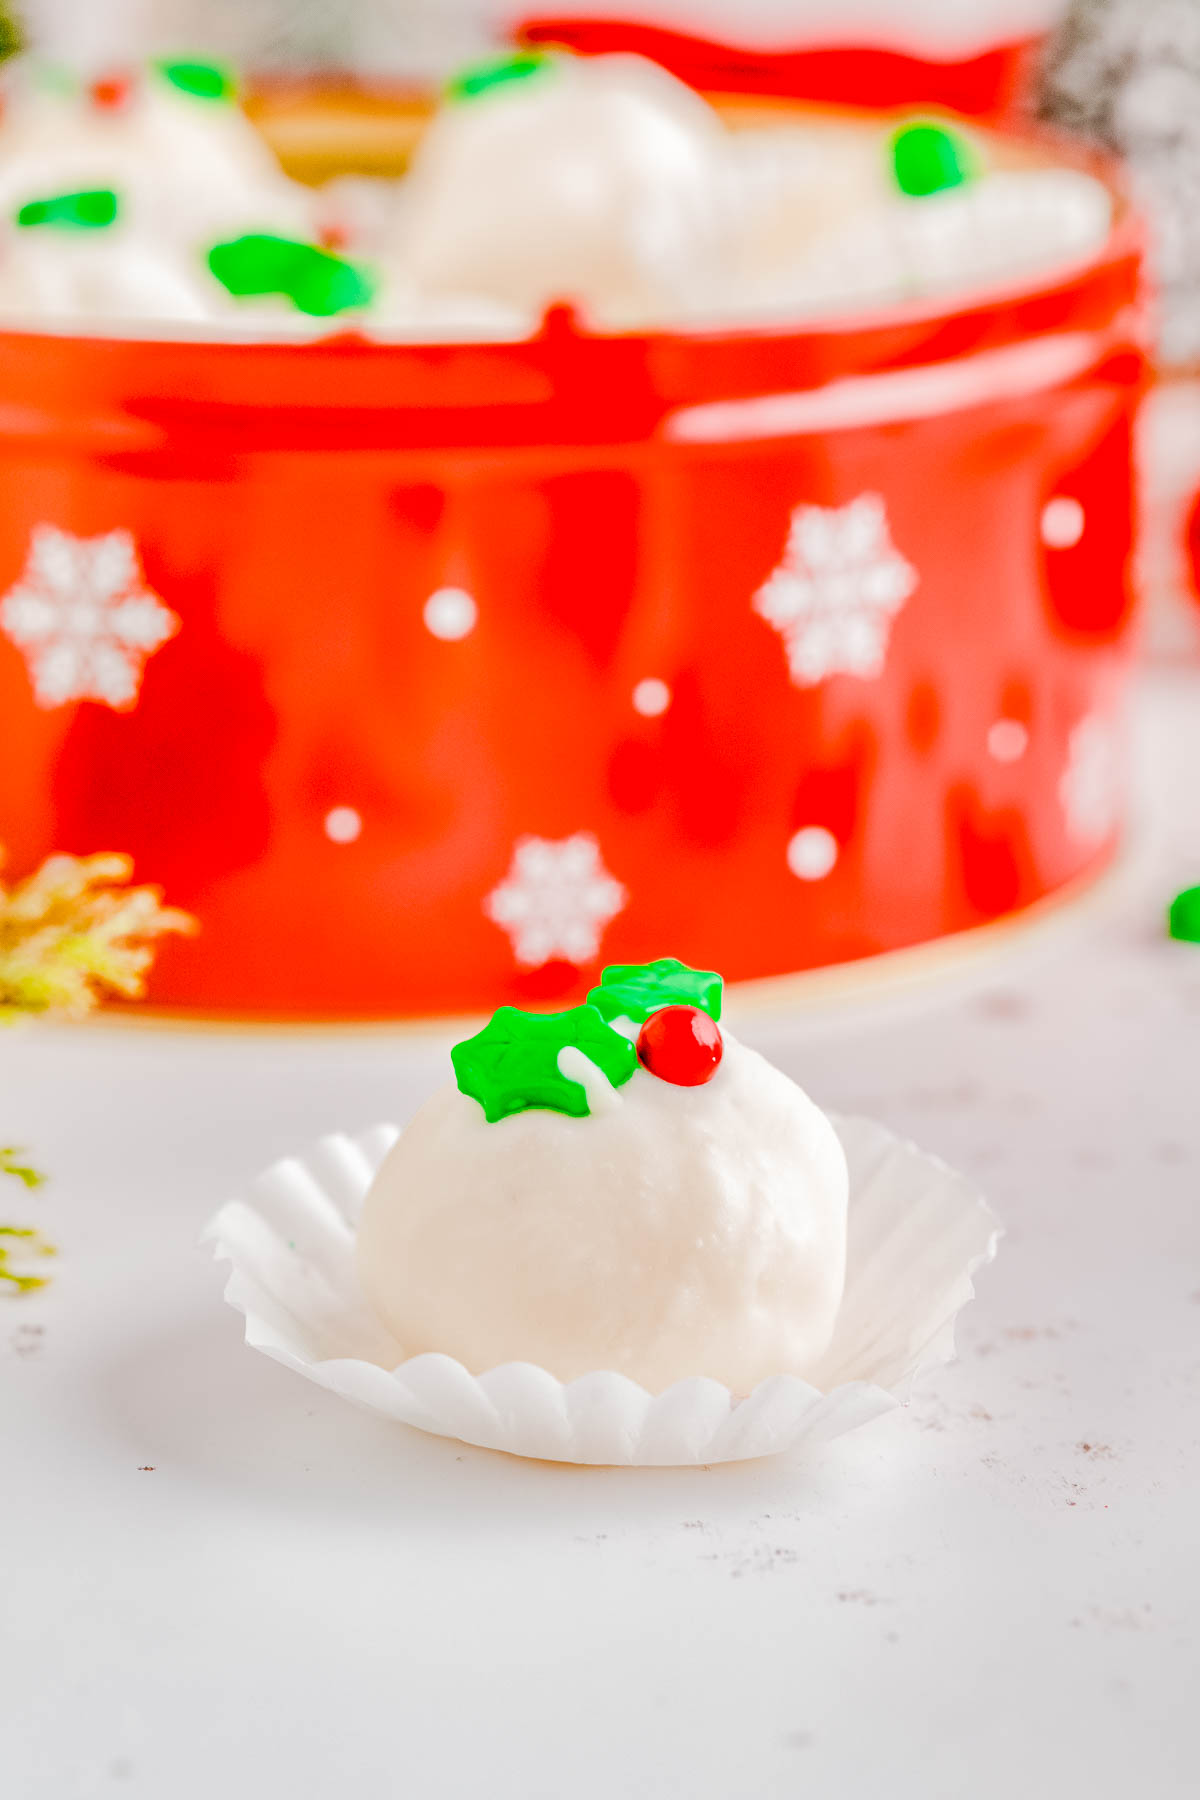 White Chocolate Truffles - Made with real butter, heavy cream, and a double dose of white chocolate in both the filling and the coating, these EASY truffles are CREAMY, decadent, and perfect for the holidays! Make this festive no-bake candy recipe for your next Christmas party, holiday entertaining, gift them to a special friend, or bring them along as a hostess gift. Everyone will appreciate these decadent little treats!